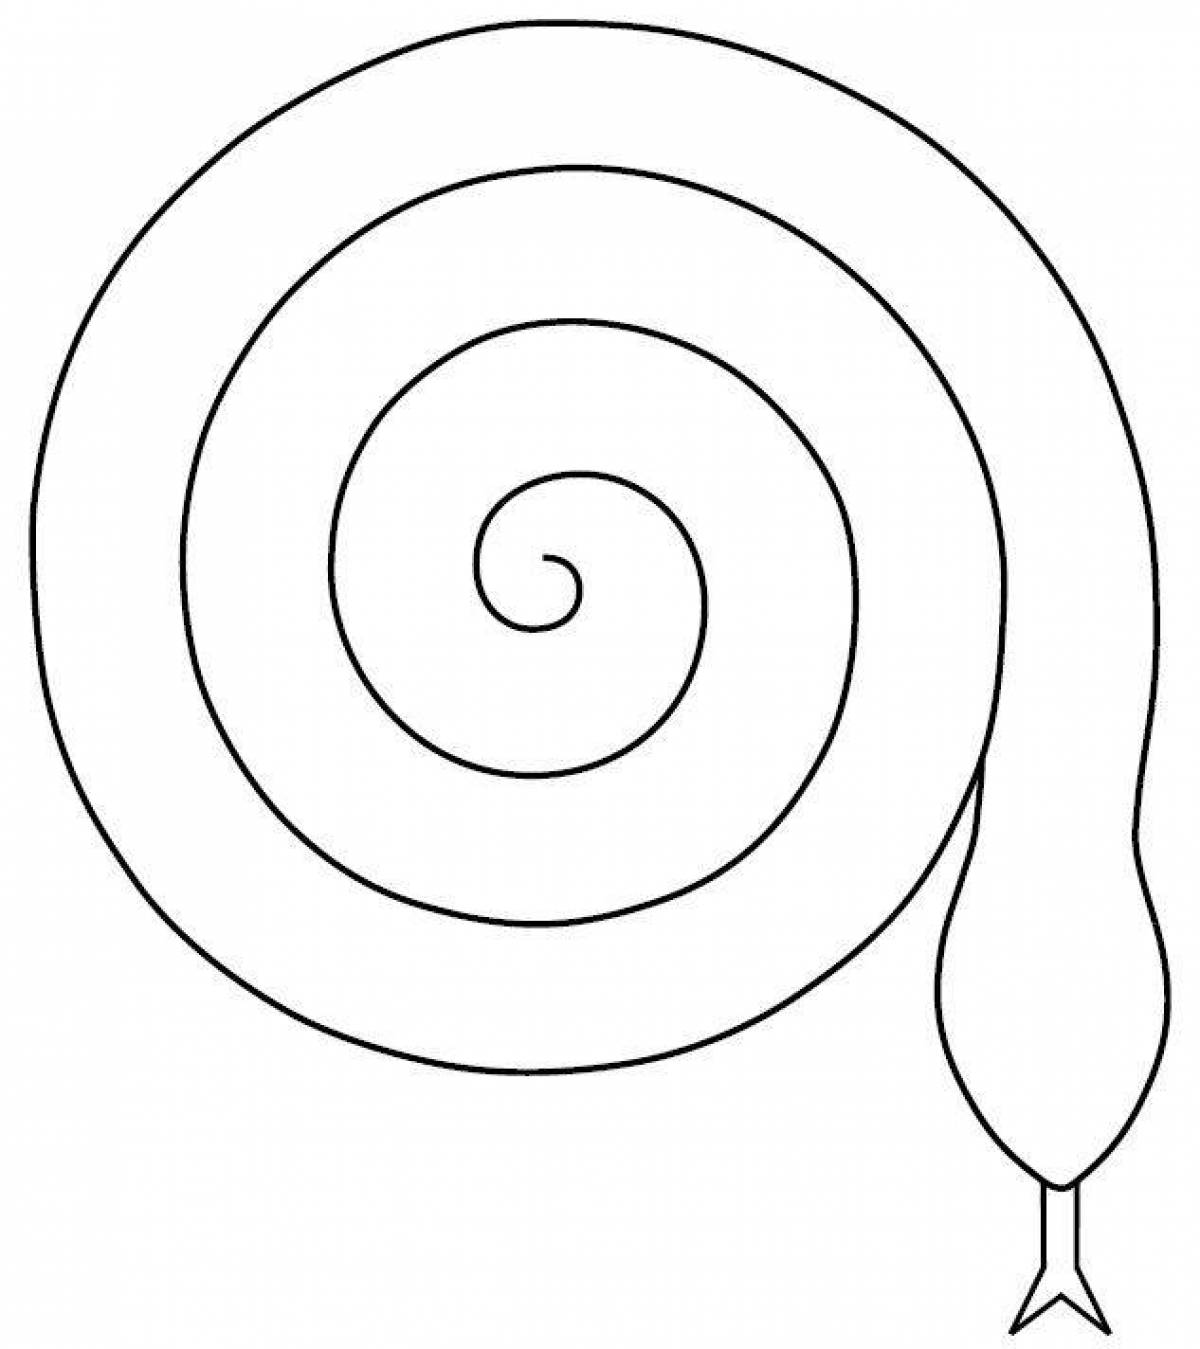 Funny spiral coloring